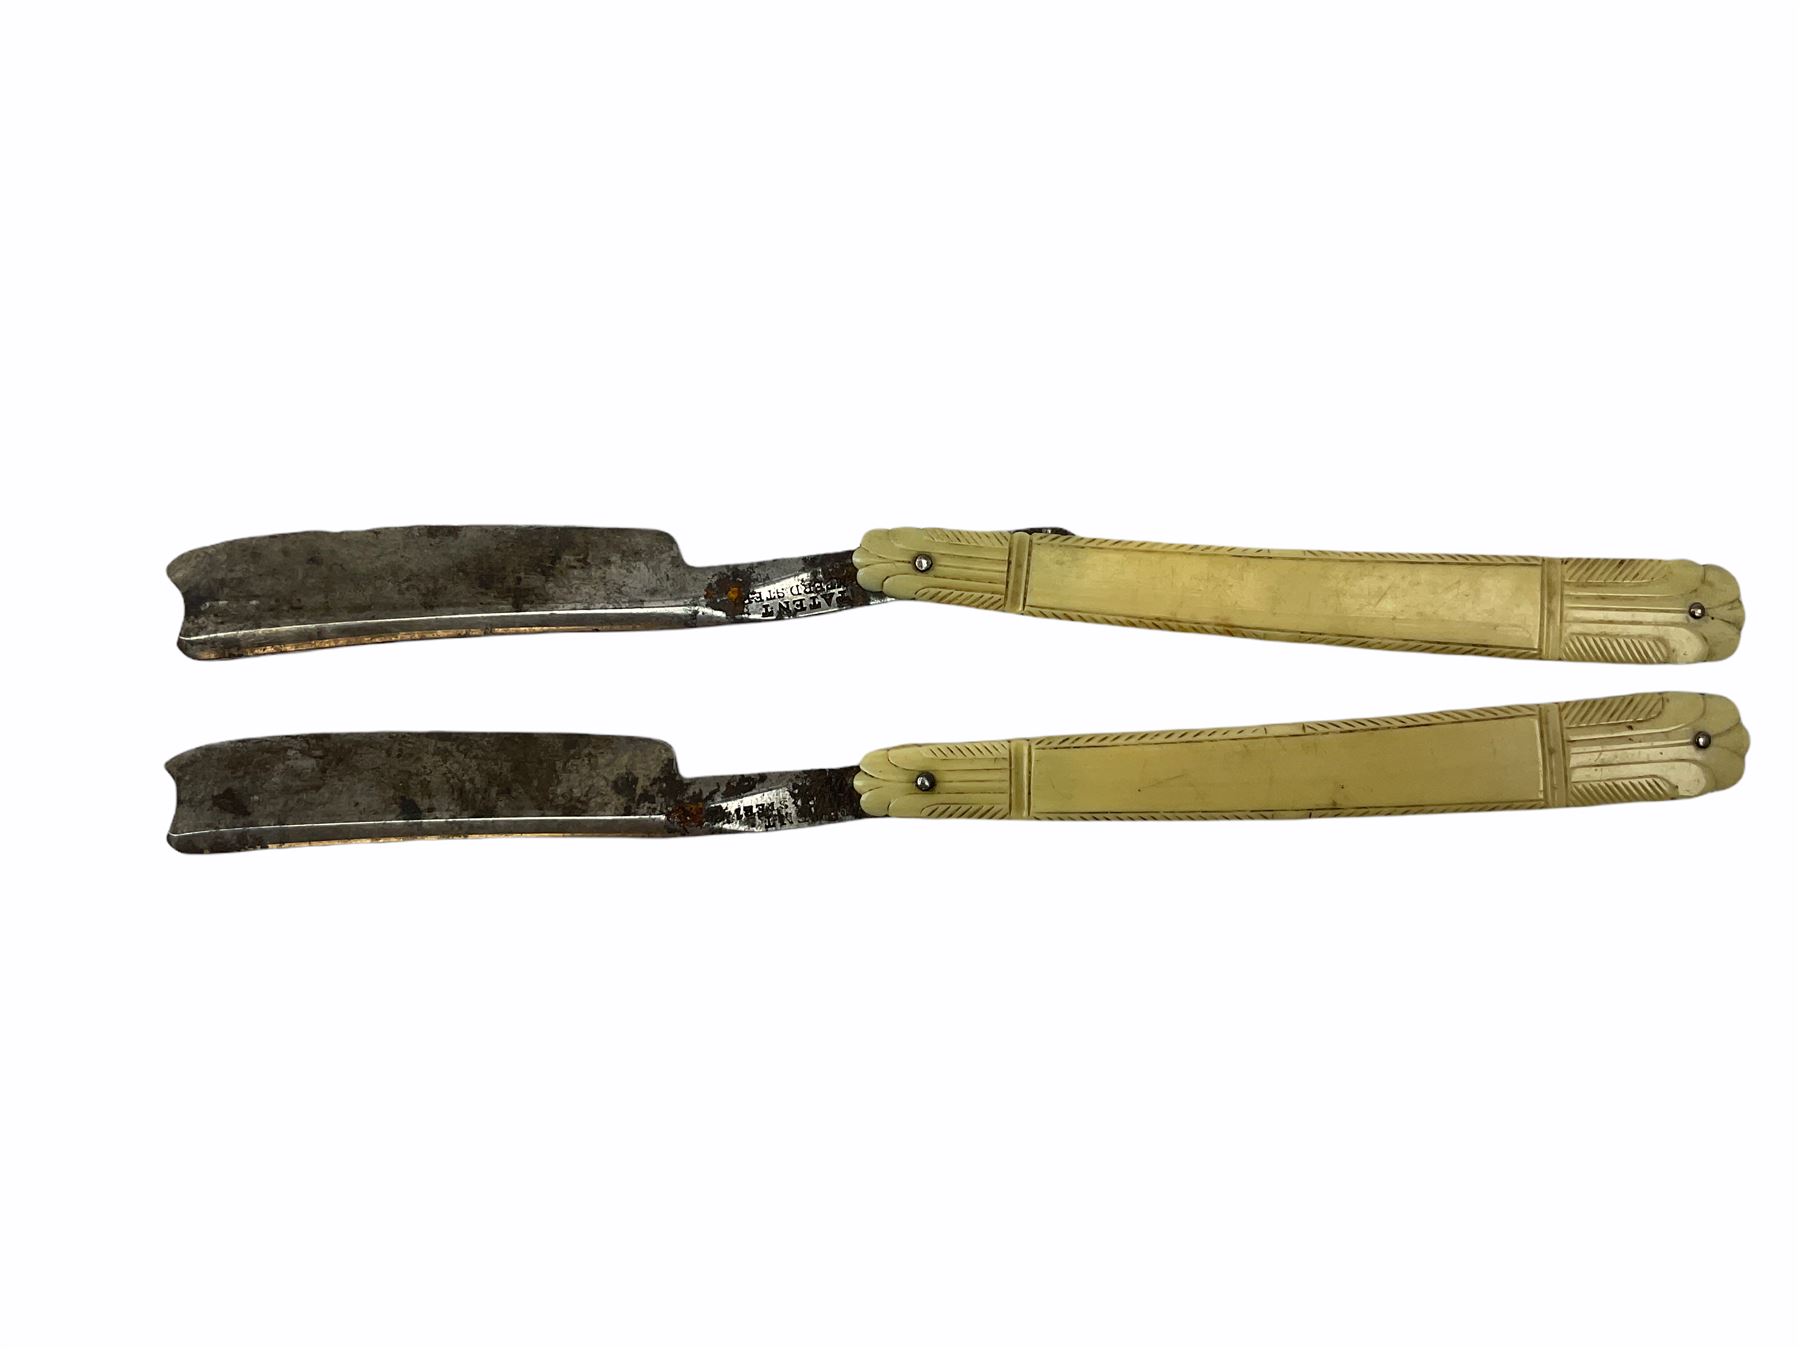 Pair of early 19th century John Barber ivory cut-throat razors with pique work decoration - Image 5 of 10